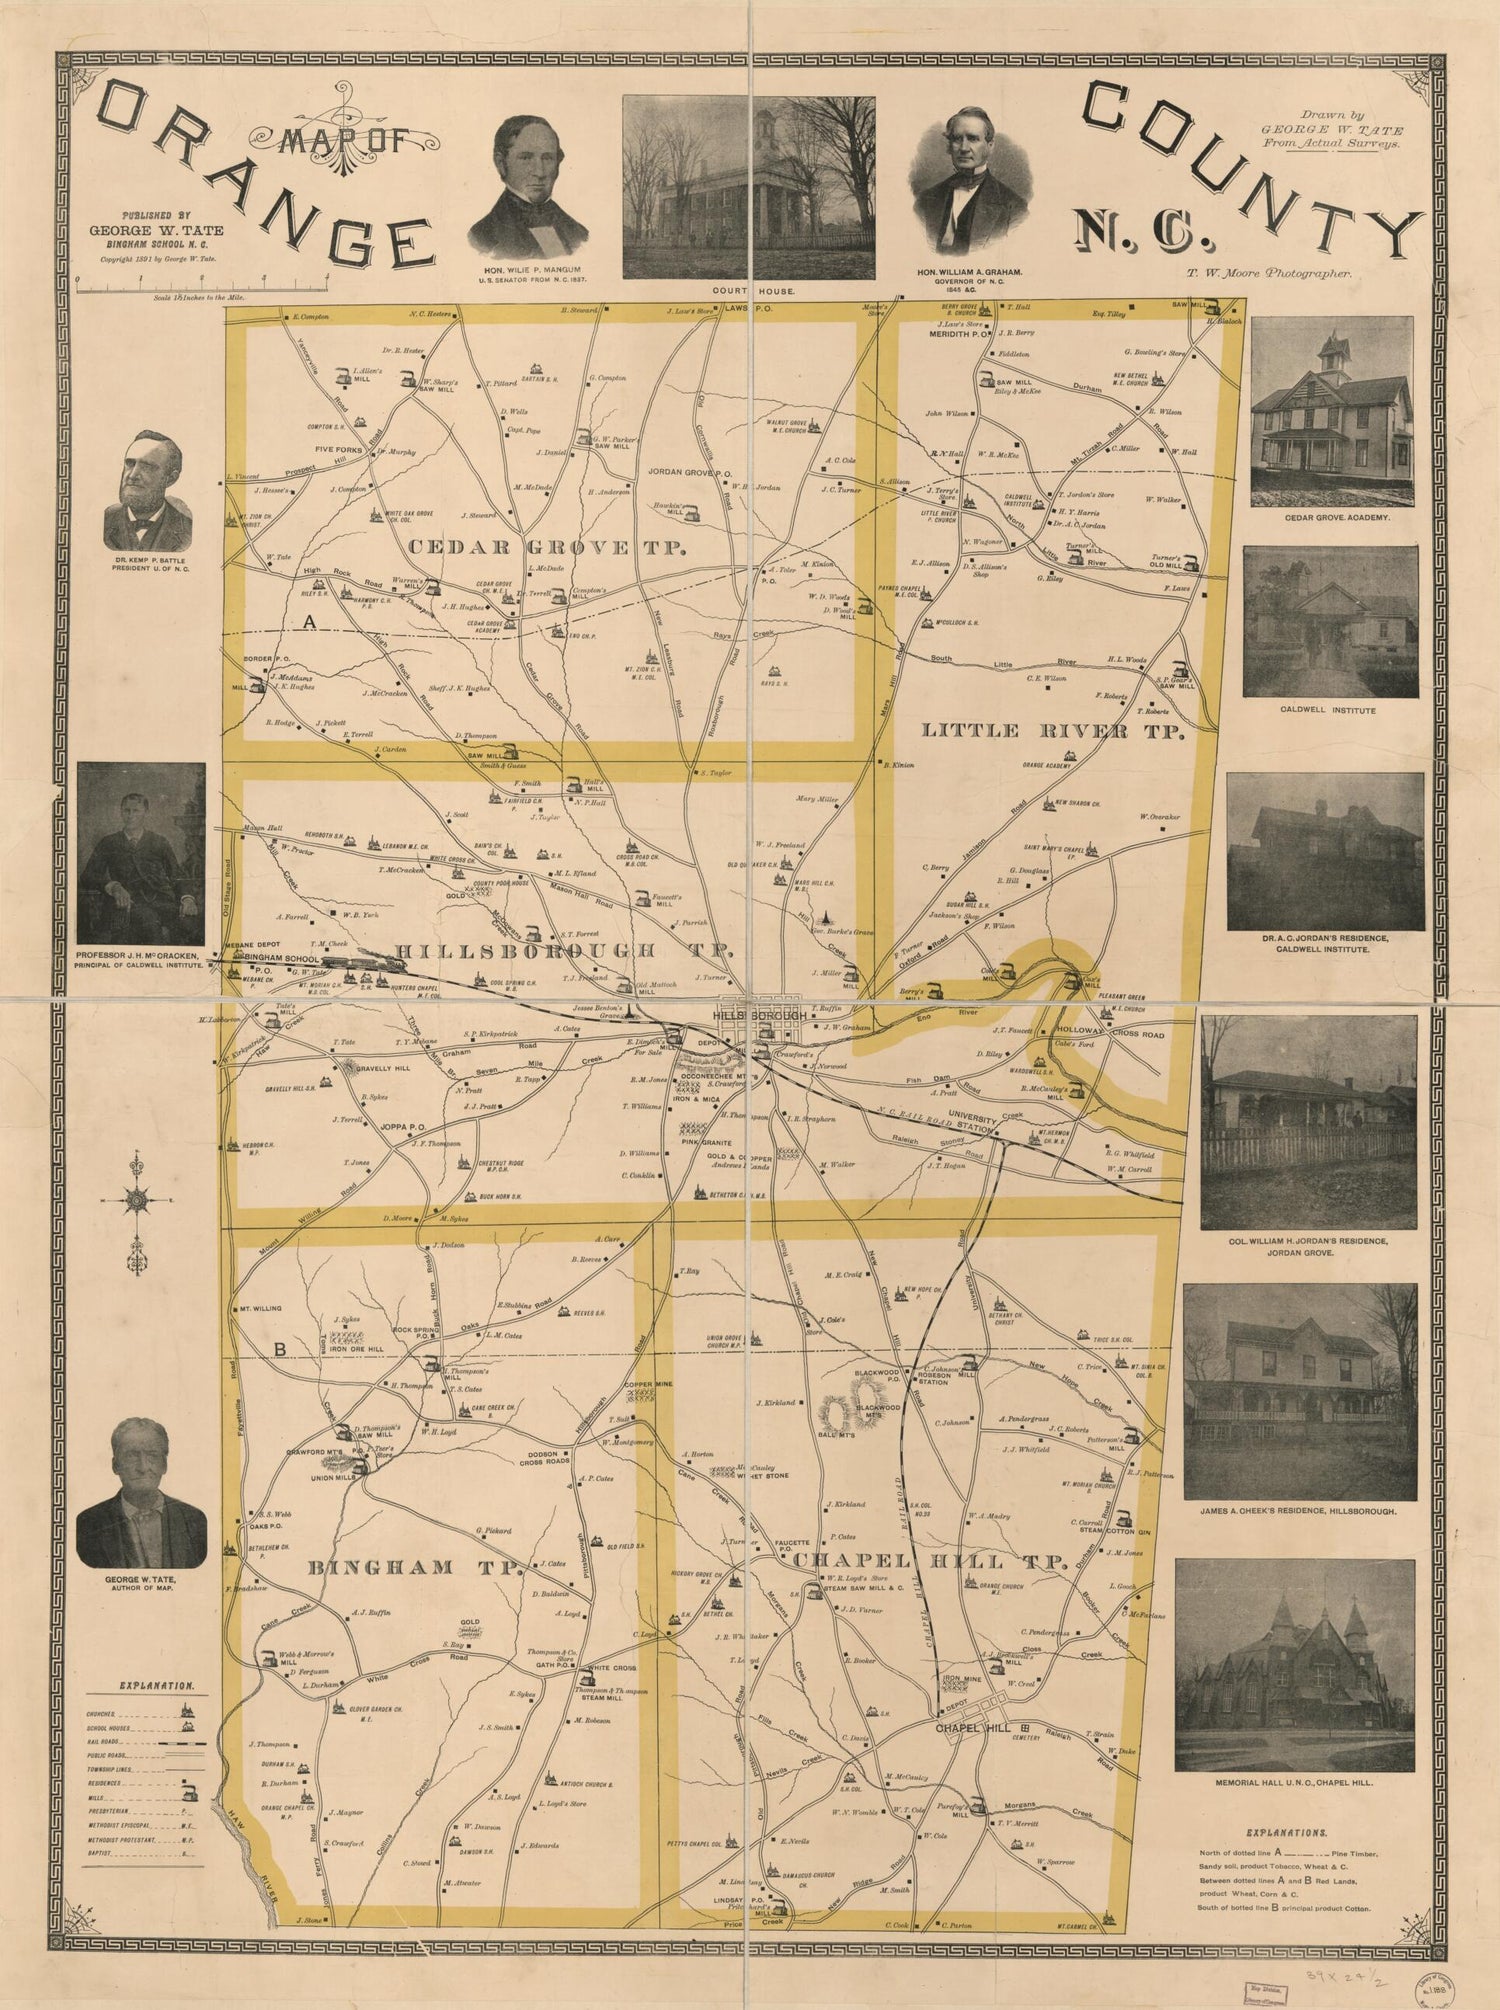 This old map of Map of Orange County, N.C. (Orange County, North Carolina) from 1891 was created by T. W. (Theophilus Wilson) Moore, George W. Tate in 1891